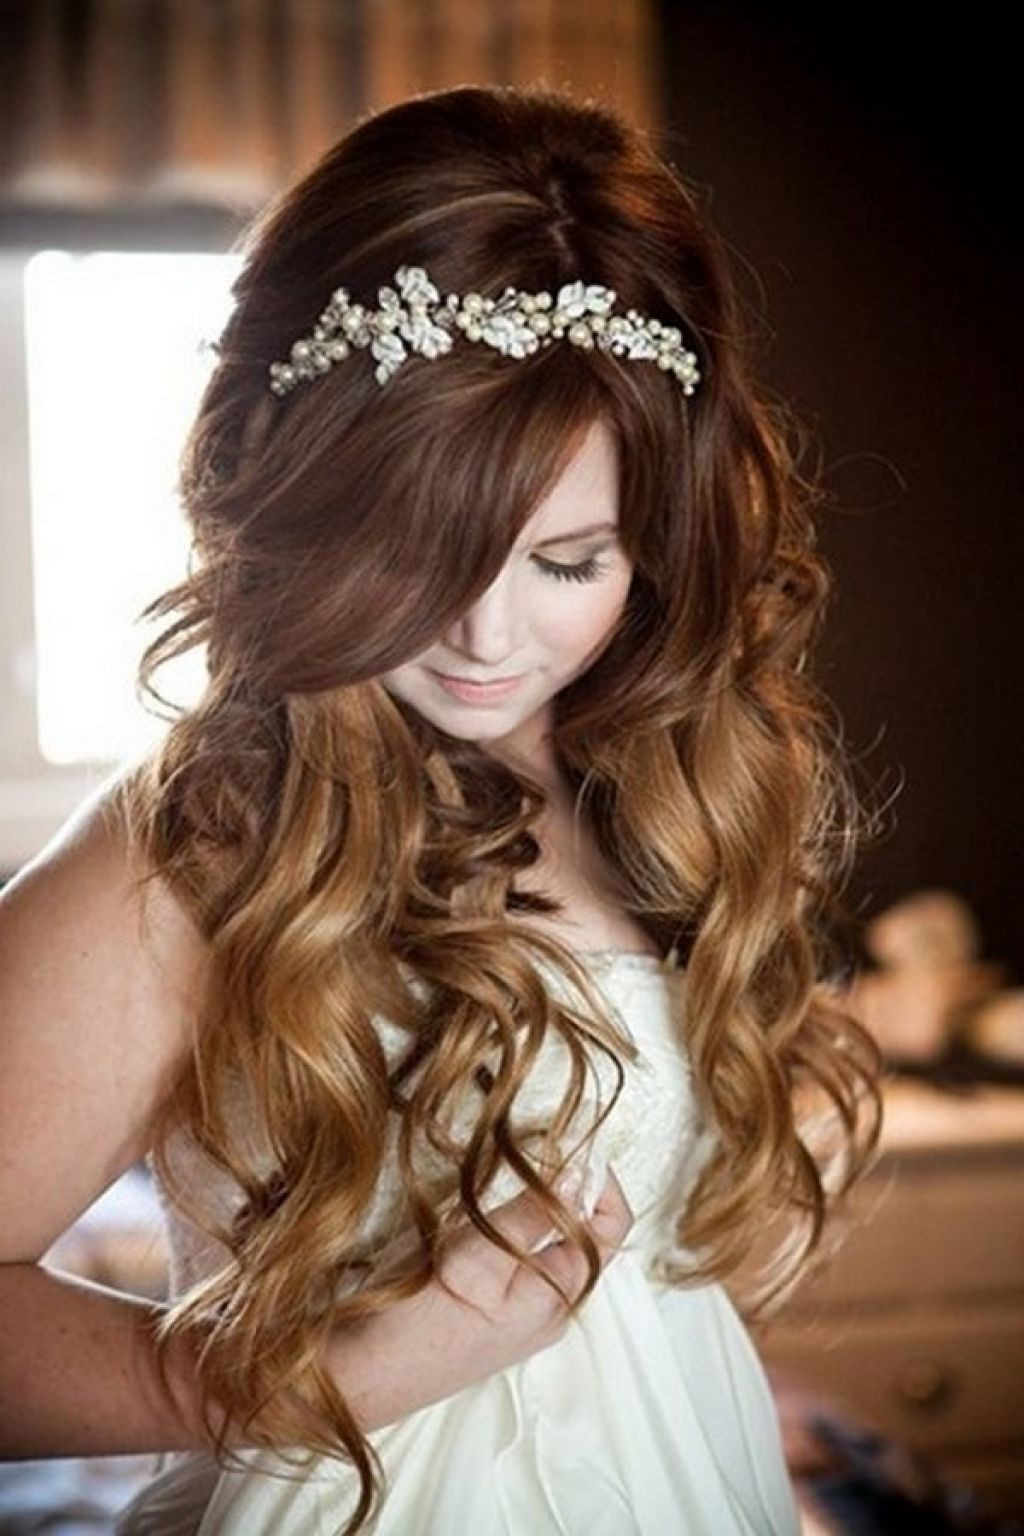 Hairstyle Ideas For Long Hair
 100 Delightful Prom Hairstyles Ideas Haircuts